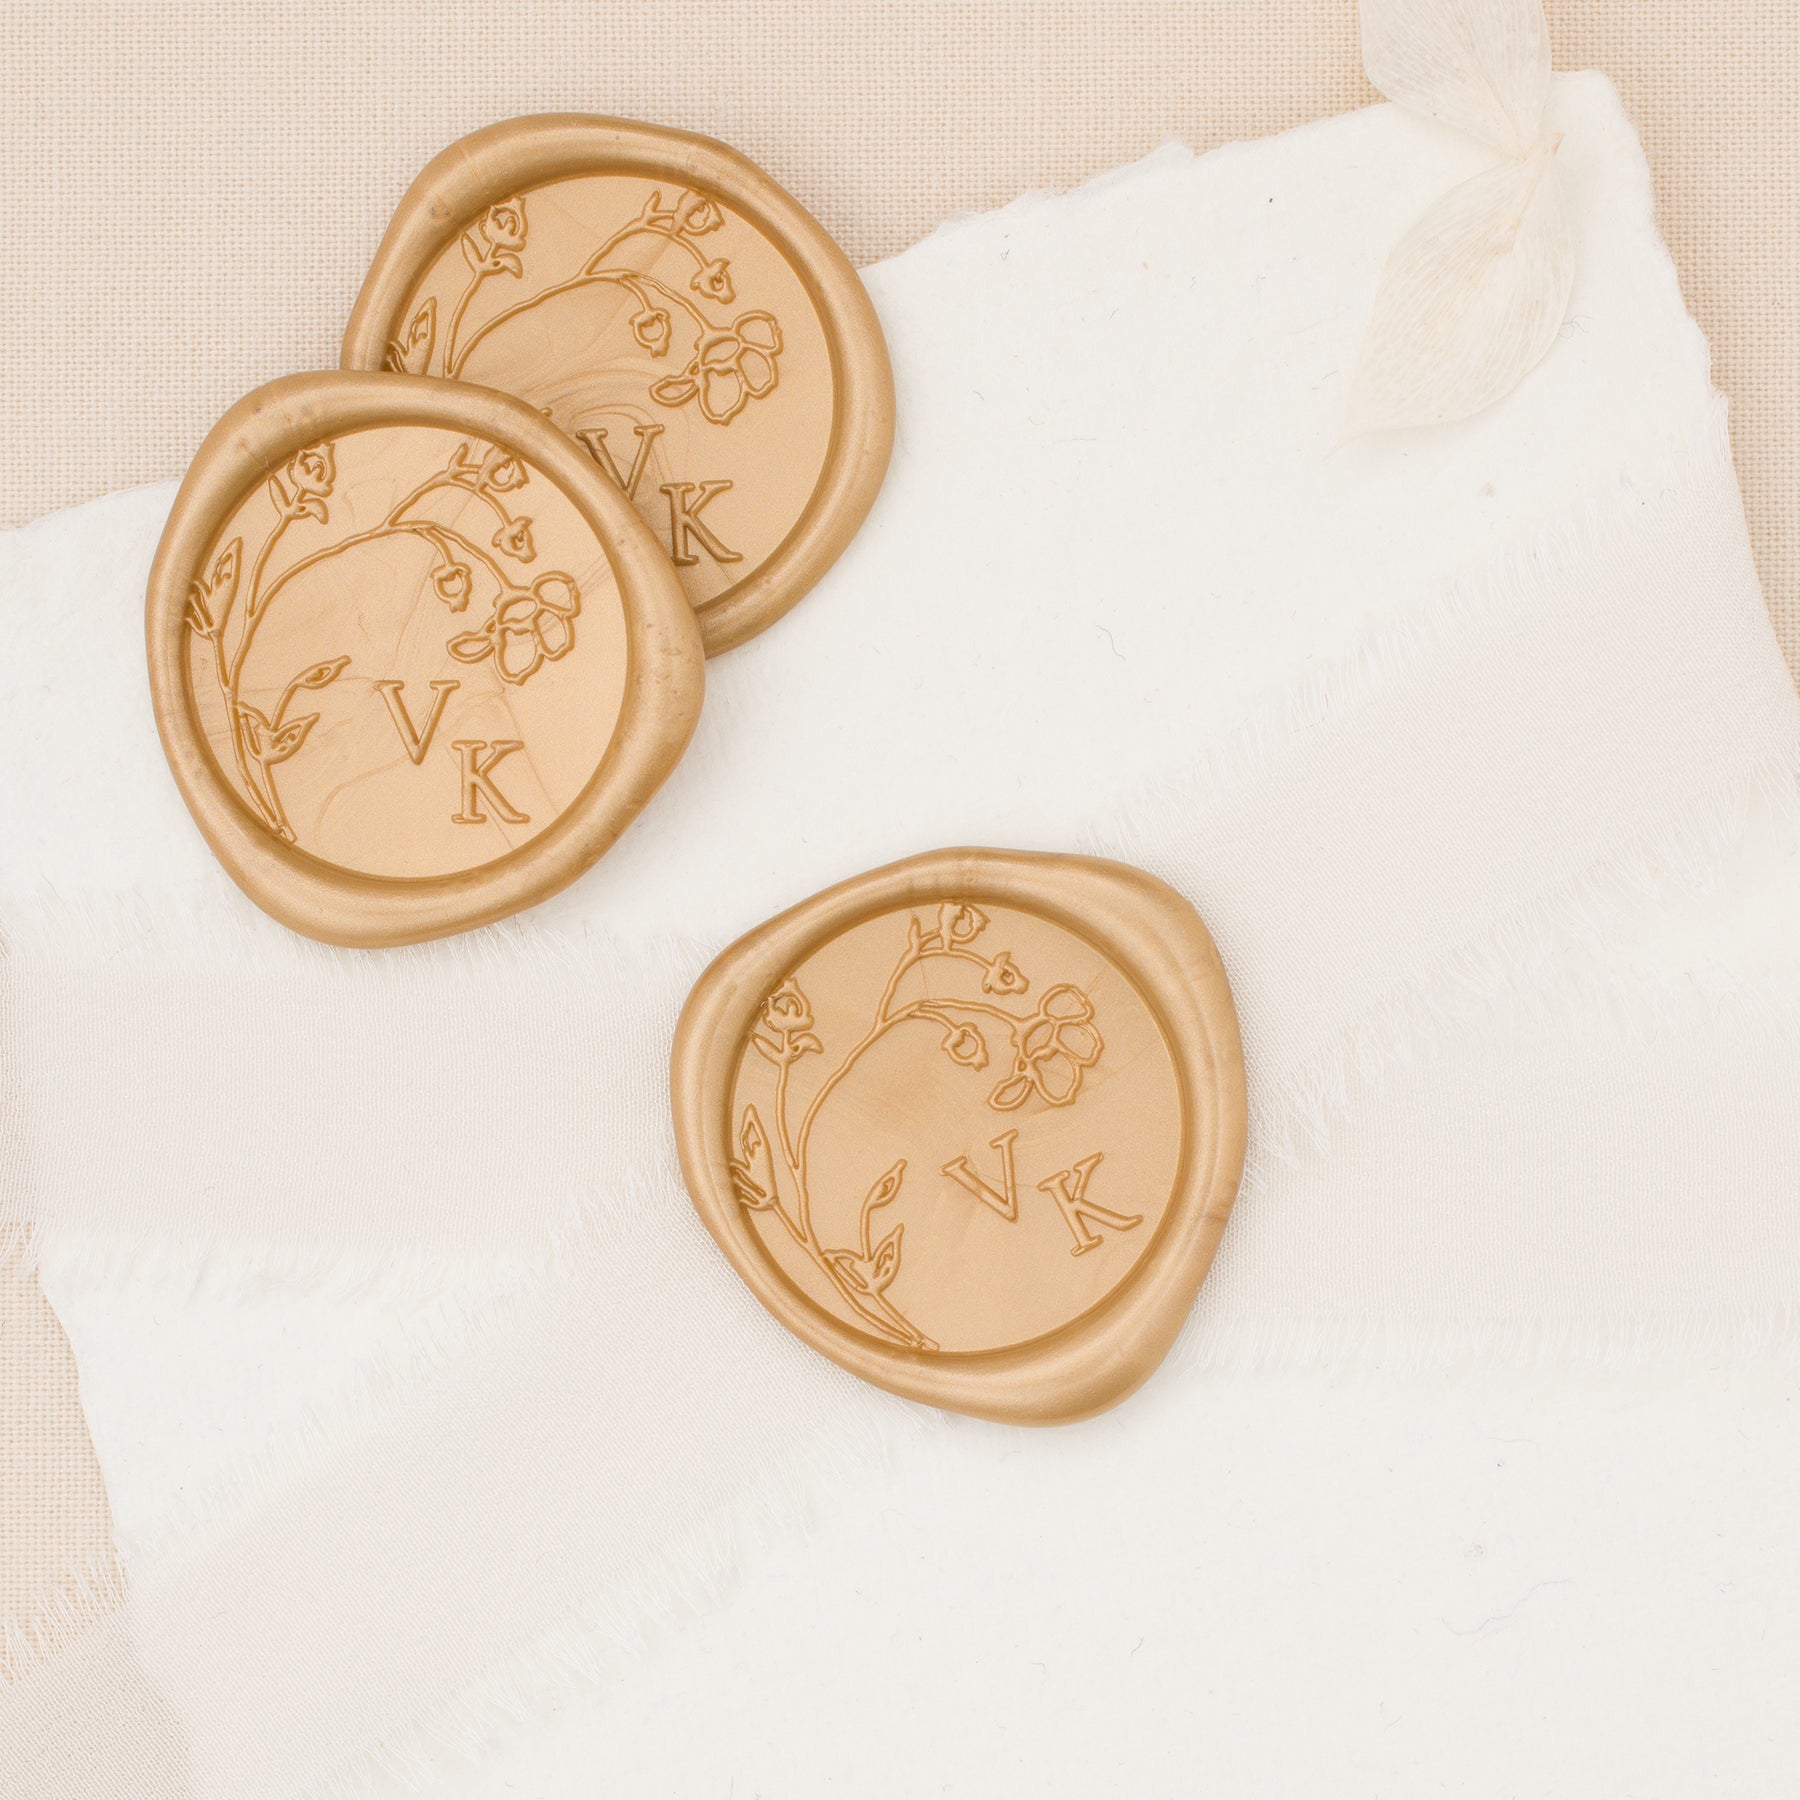 Wax Seal Stamps, White Wax Seal, Initials Wax Seal Stamp Wedding Invitation  Wax Seal, White Wax Seal Stickers, Initials Wax Seal Stamp 